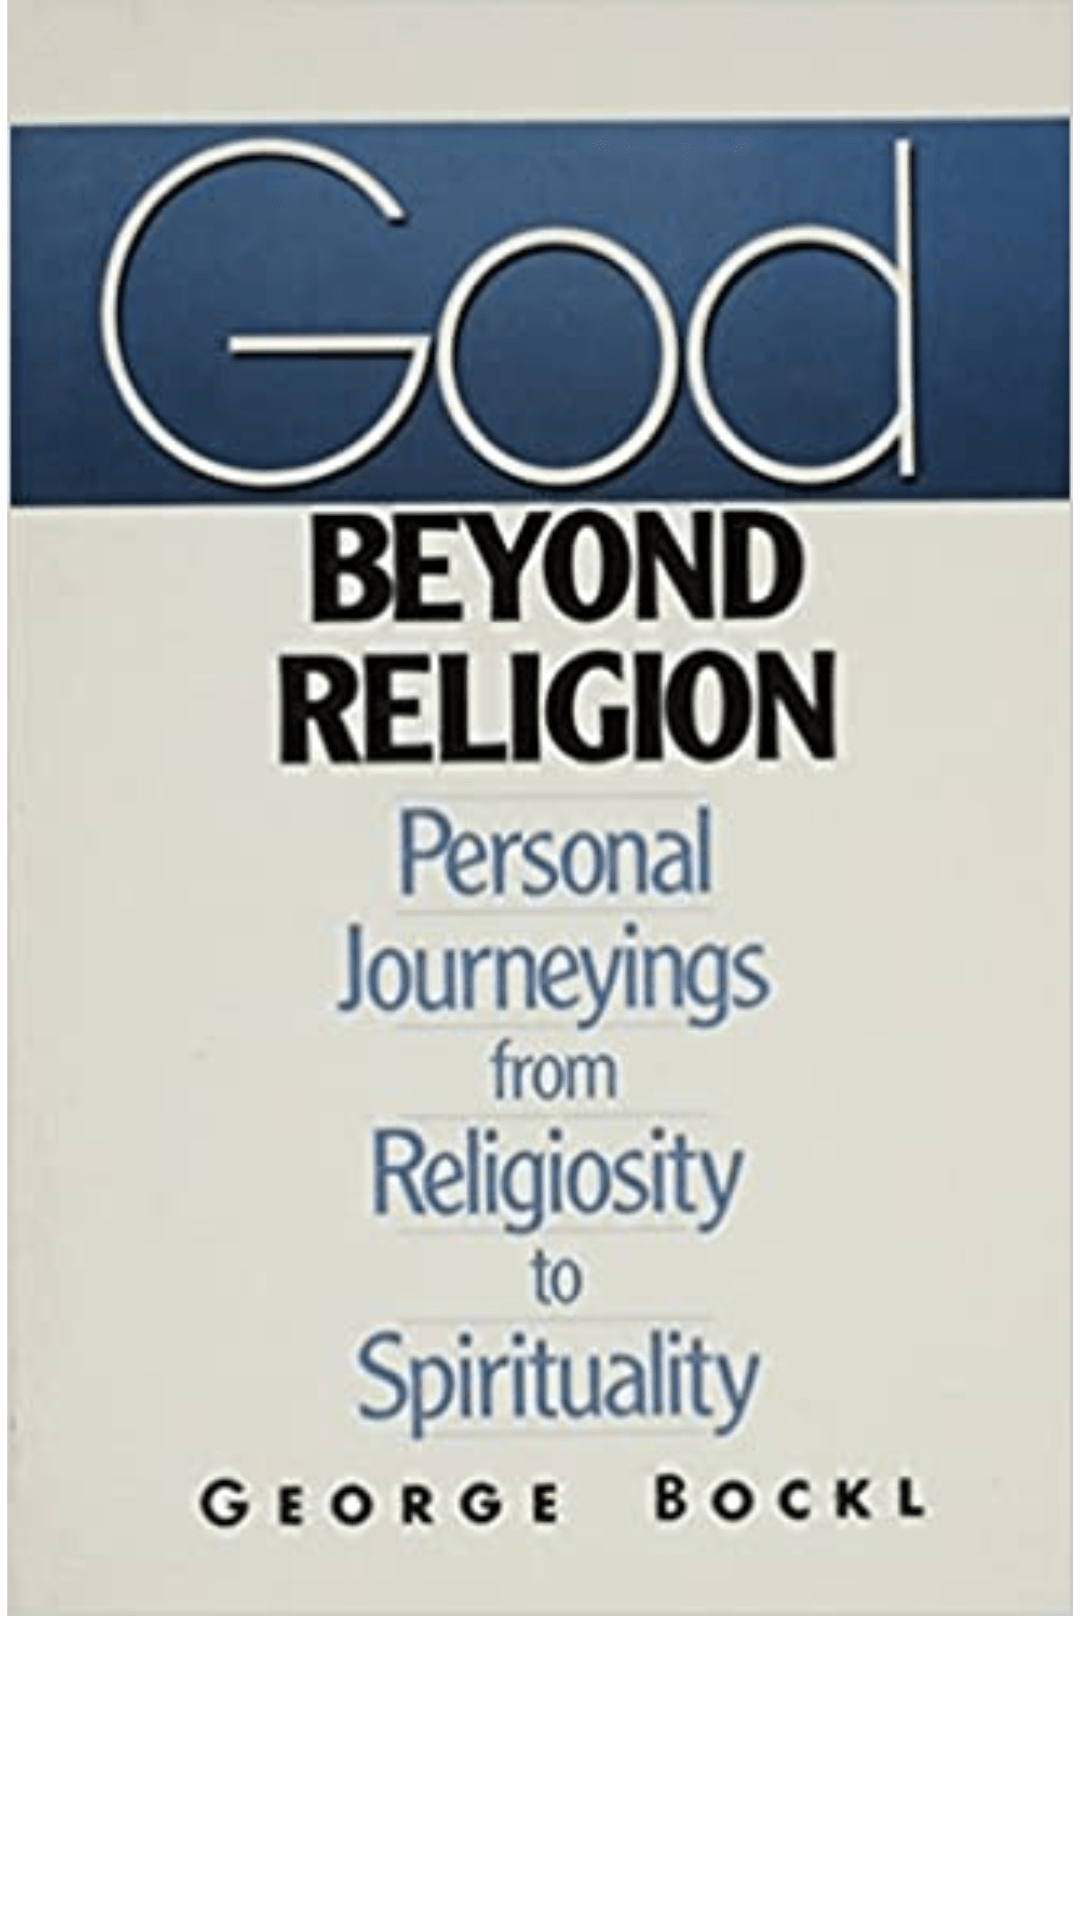 God Beyond Religion: Personal Journeyings from Religiosity to Spirituality